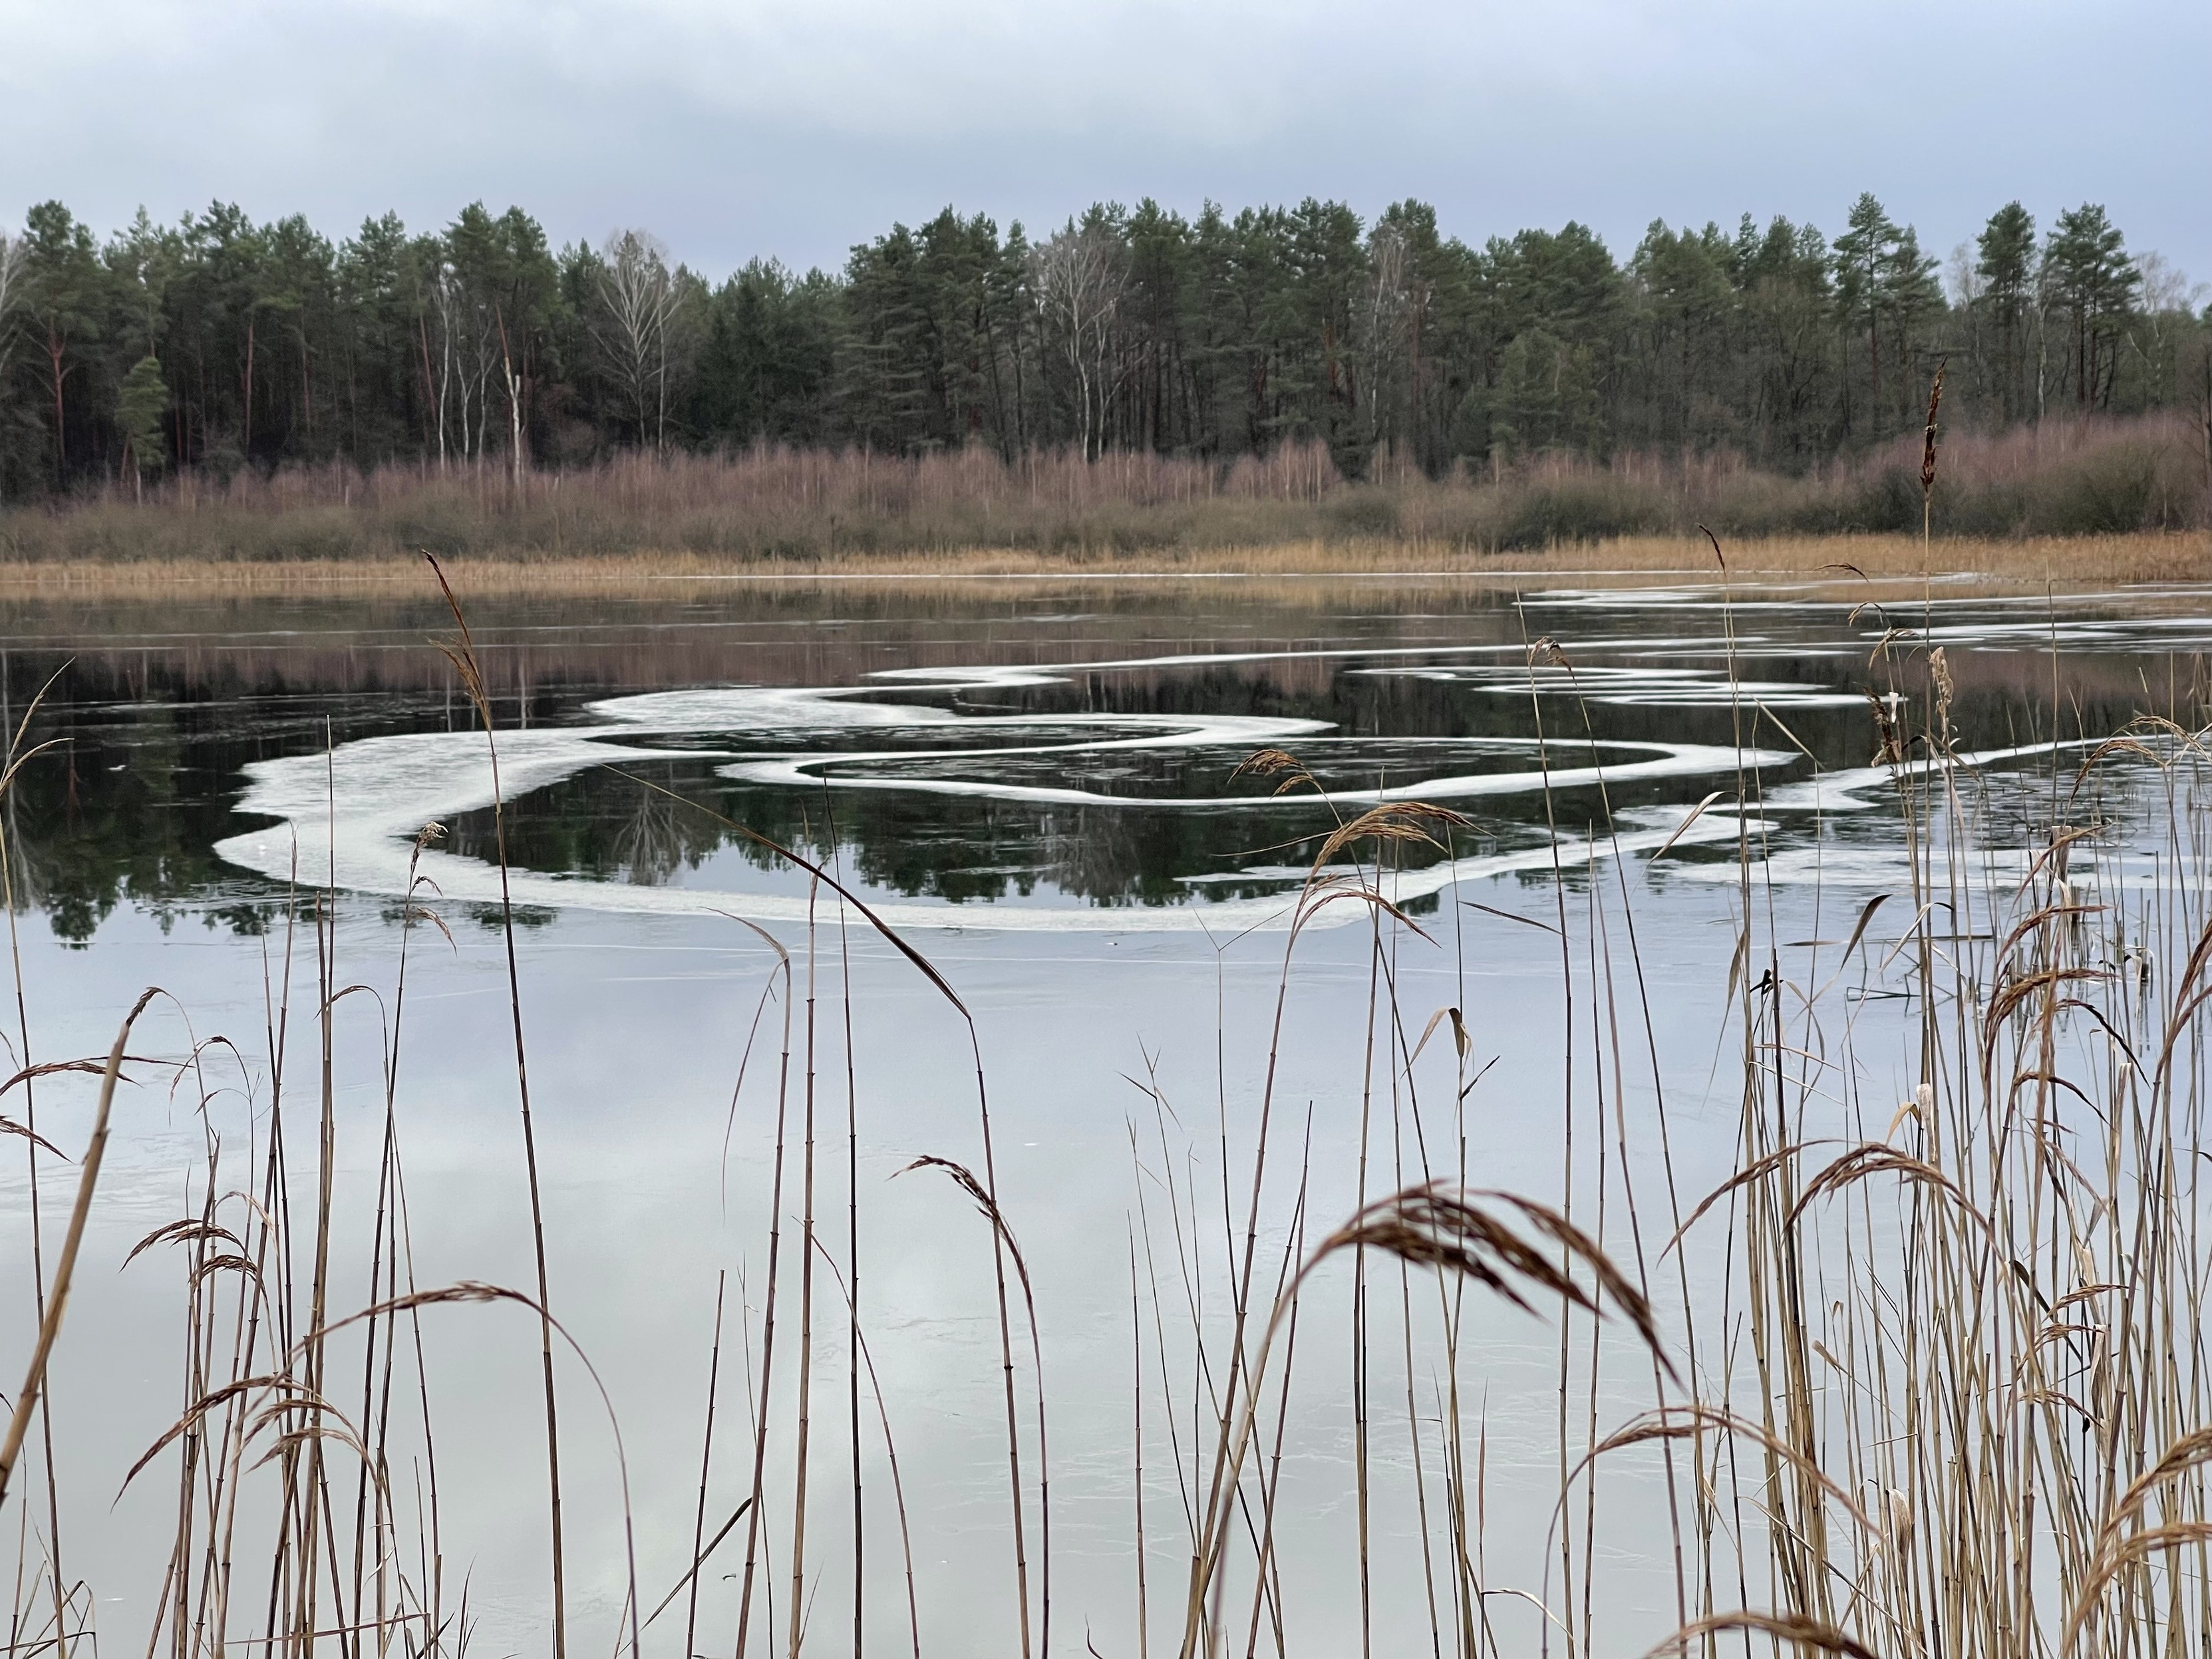 A tranquil lake with patches of melting ice, surrounded by forest and reeds in the foreground.